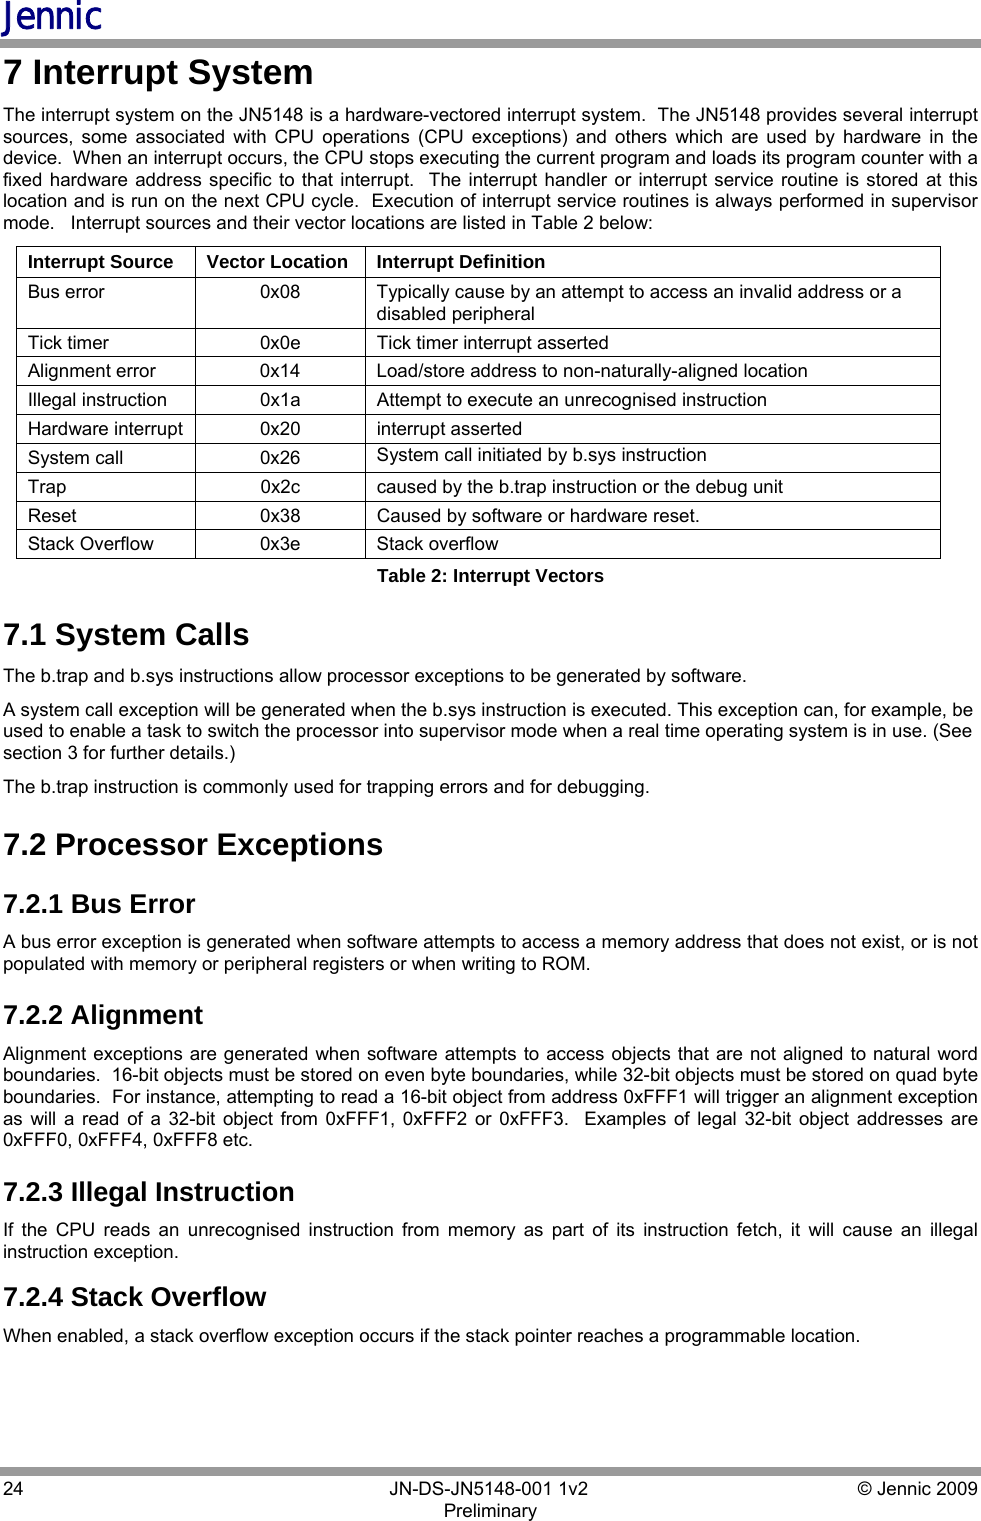 Jennic 24        JN-DS-JN5148-001 1v2  © Jennic 2009 Preliminary  7 Interrupt System The interrupt system on the JN5148 is a hardware-vectored interrupt system.  The JN5148 provides several interrupt sources, some associated with CPU operations (CPU exceptions) and others which are used by hardware in the device.  When an interrupt occurs, the CPU stops executing the current program and loads its program counter with a fixed hardware address specific to that interrupt.  The interrupt handler or interrupt service routine is stored at this location and is run on the next CPU cycle.  Execution of interrupt service routines is always performed in supervisor mode.   Interrupt sources and their vector locations are listed in Table 2 below: Interrupt Source  Vector Location  Interrupt Definition Bus error  0x08  Typically cause by an attempt to access an invalid address or a disabled peripheral Tick timer  0x0e  Tick timer interrupt asserted Alignment error  0x14  Load/store address to non-naturally-aligned location Illegal instruction  0x1a  Attempt to execute an unrecognised instruction Hardware interrupt  0x20  interrupt asserted System call  0x26  System call initiated by b.sys instruction Trap  0x2c  caused by the b.trap instruction or the debug unit Reset  0x38  Caused by software or hardware reset.  Stack Overflow  0x3e  Stack overflow Table 2: Interrupt Vectors 7.1 System Calls The b.trap and b.sys instructions allow processor exceptions to be generated by software. A system call exception will be generated when the b.sys instruction is executed. This exception can, for example, be used to enable a task to switch the processor into supervisor mode when a real time operating system is in use. (See section 3 for further details.) The b.trap instruction is commonly used for trapping errors and for debugging. 7.2 Processor Exceptions 7.2.1 Bus Error A bus error exception is generated when software attempts to access a memory address that does not exist, or is not populated with memory or peripheral registers or when writing to ROM. 7.2.2 Alignment Alignment exceptions are generated when software attempts to access objects that are not aligned to natural word boundaries.  16-bit objects must be stored on even byte boundaries, while 32-bit objects must be stored on quad byte boundaries.  For instance, attempting to read a 16-bit object from address 0xFFF1 will trigger an alignment exception as will a read of a 32-bit object from 0xFFF1, 0xFFF2 or 0xFFF3.  Examples of legal 32-bit object addresses are 0xFFF0, 0xFFF4, 0xFFF8 etc. 7.2.3 Illegal Instruction If the CPU reads an unrecognised instruction from memory as part of its instruction fetch, it will cause an illegal instruction exception. 7.2.4 Stack Overflow When enabled, a stack overflow exception occurs if the stack pointer reaches a programmable location.  